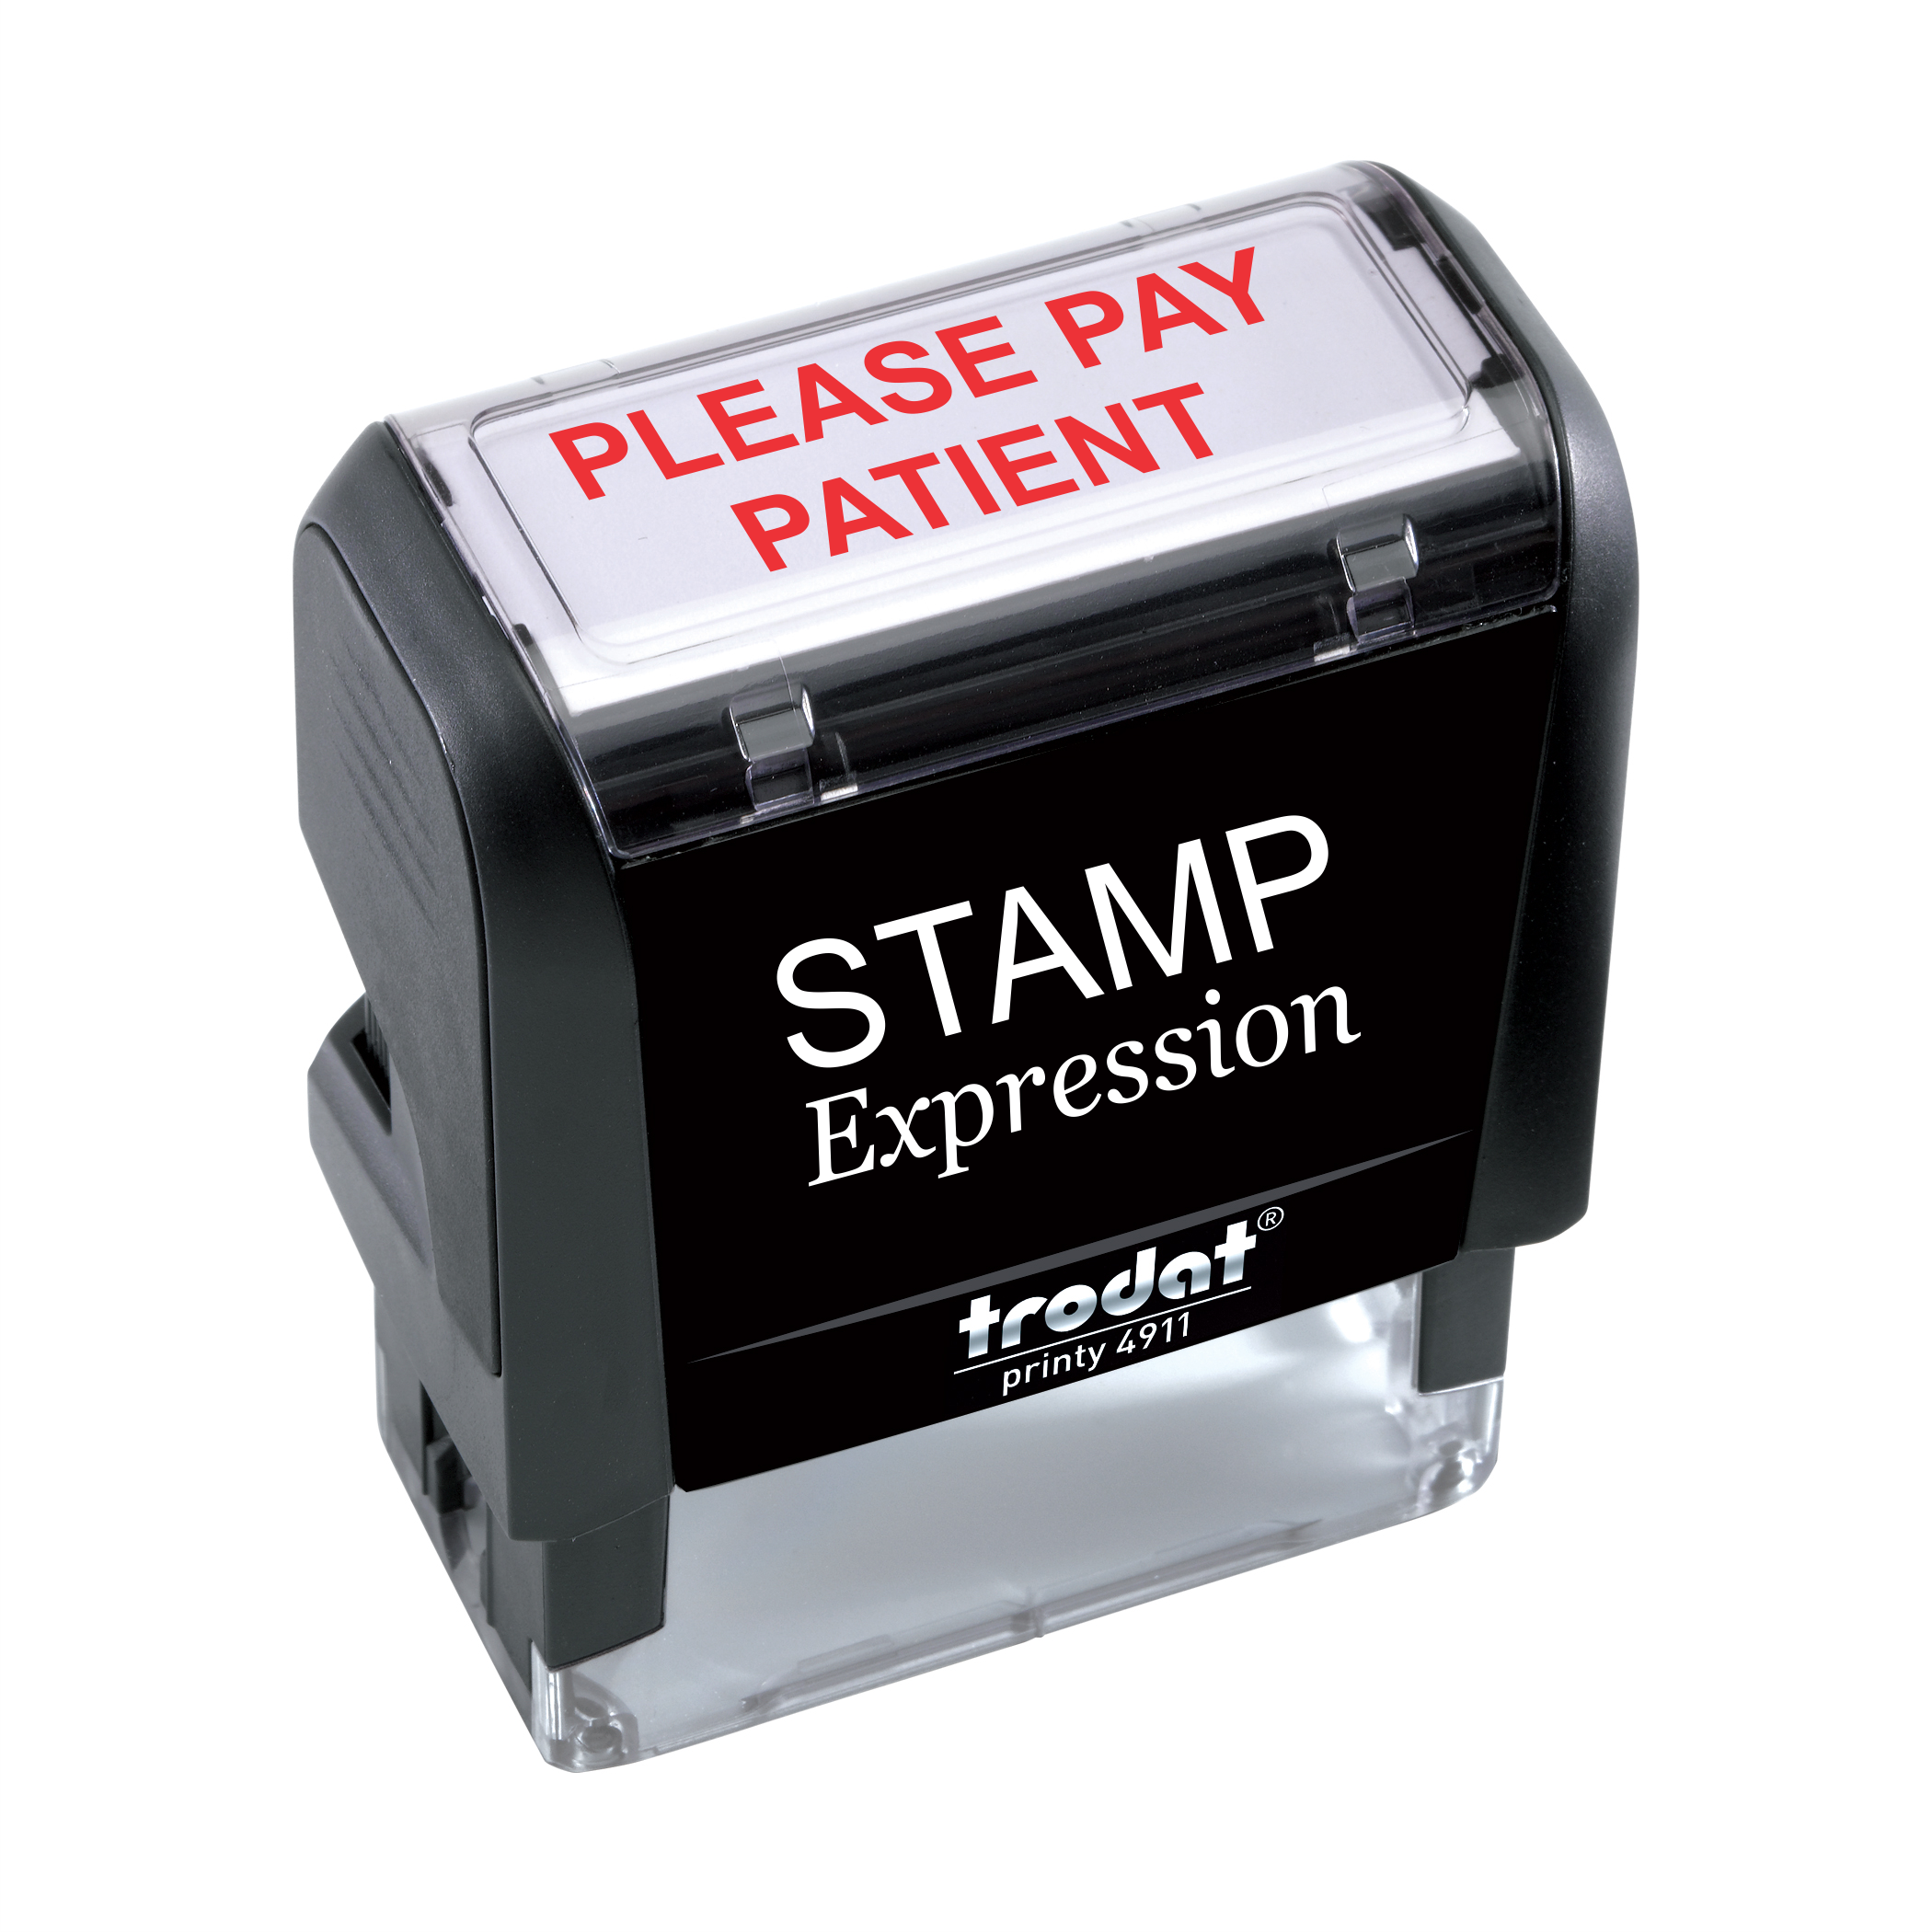 Please Pay Patient Medical Self Inking Rubber Stamp